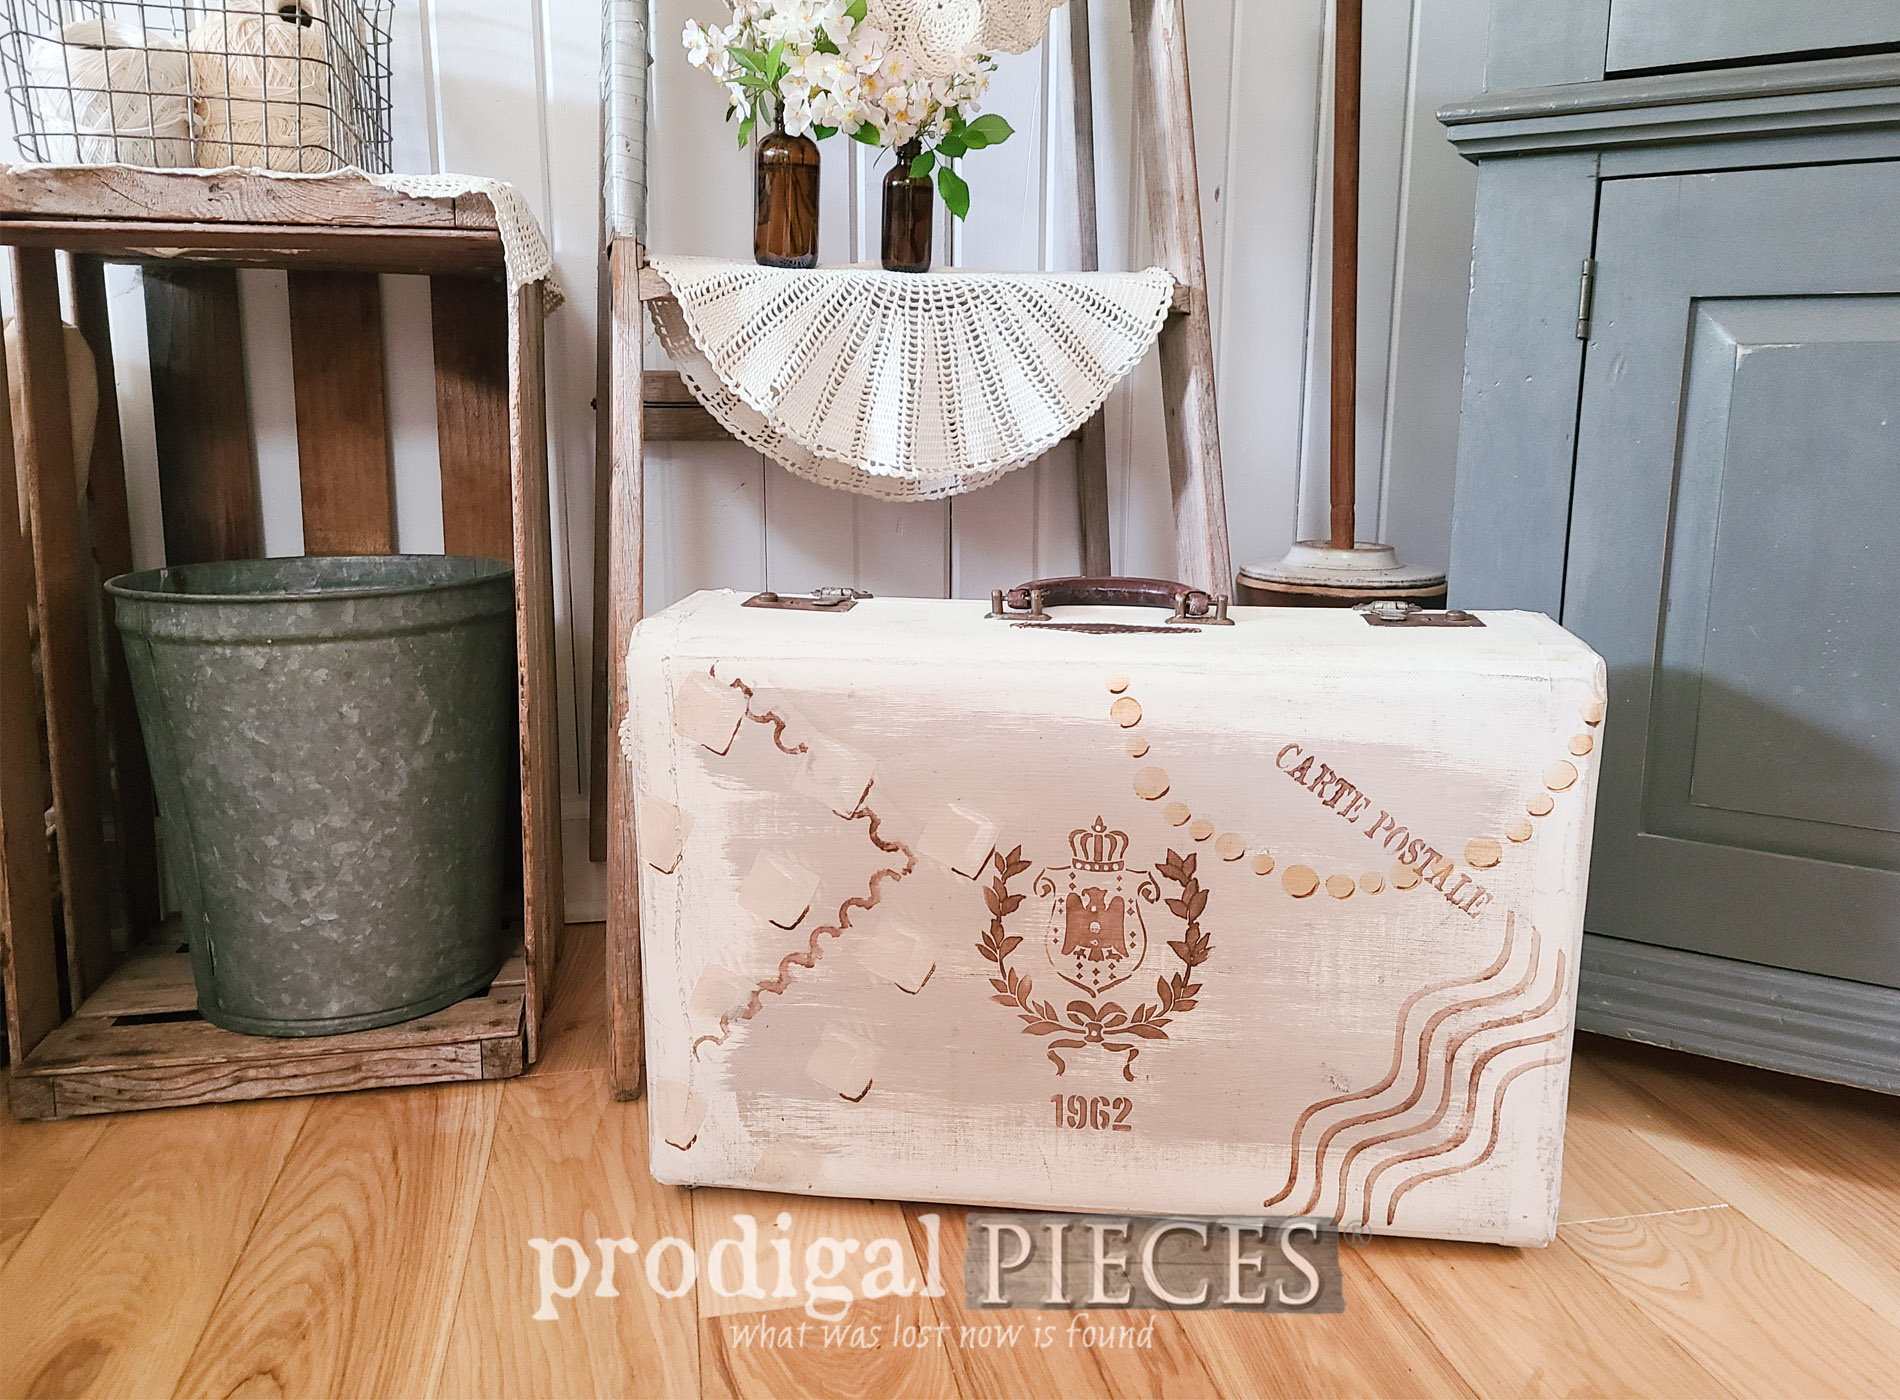 Featured Vintage Luggage Painted DIY Tutorial by Larissa of Prodigal Pieces | prodigalpieces.com #prodigalpieces #vintage #diy #luggage